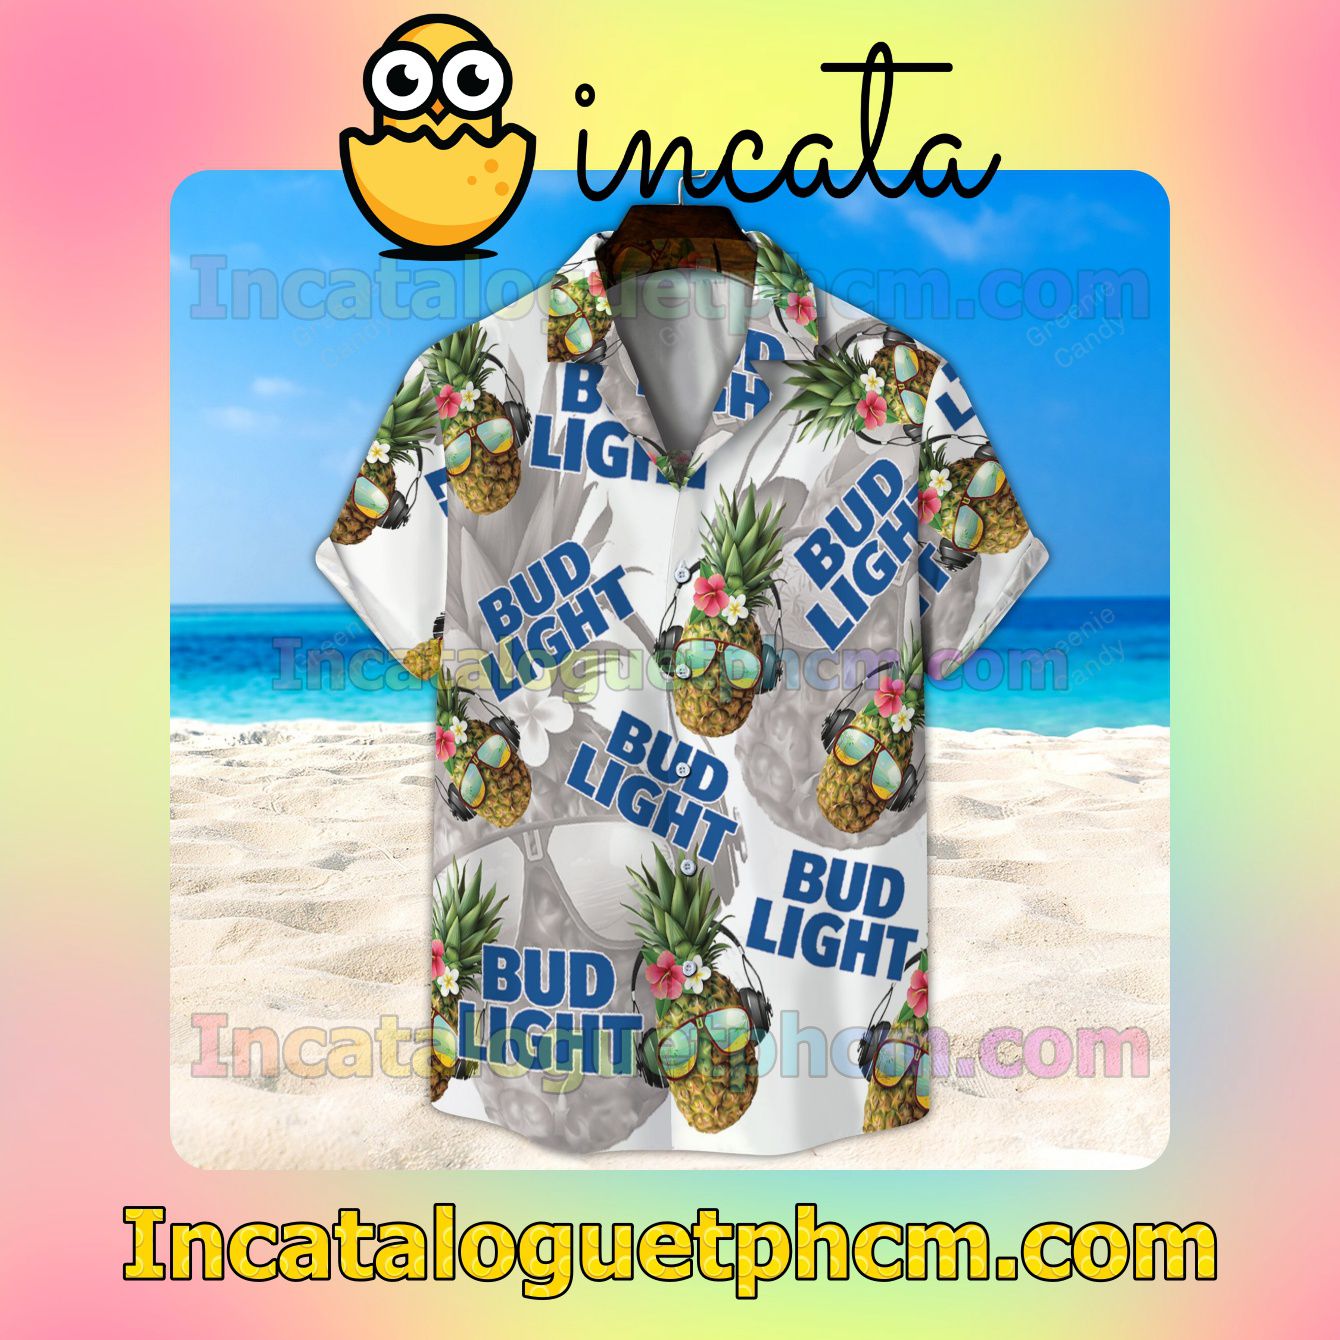 Bud Light Funny Pineapple Unisex White Button Shirt And Swim Trunk